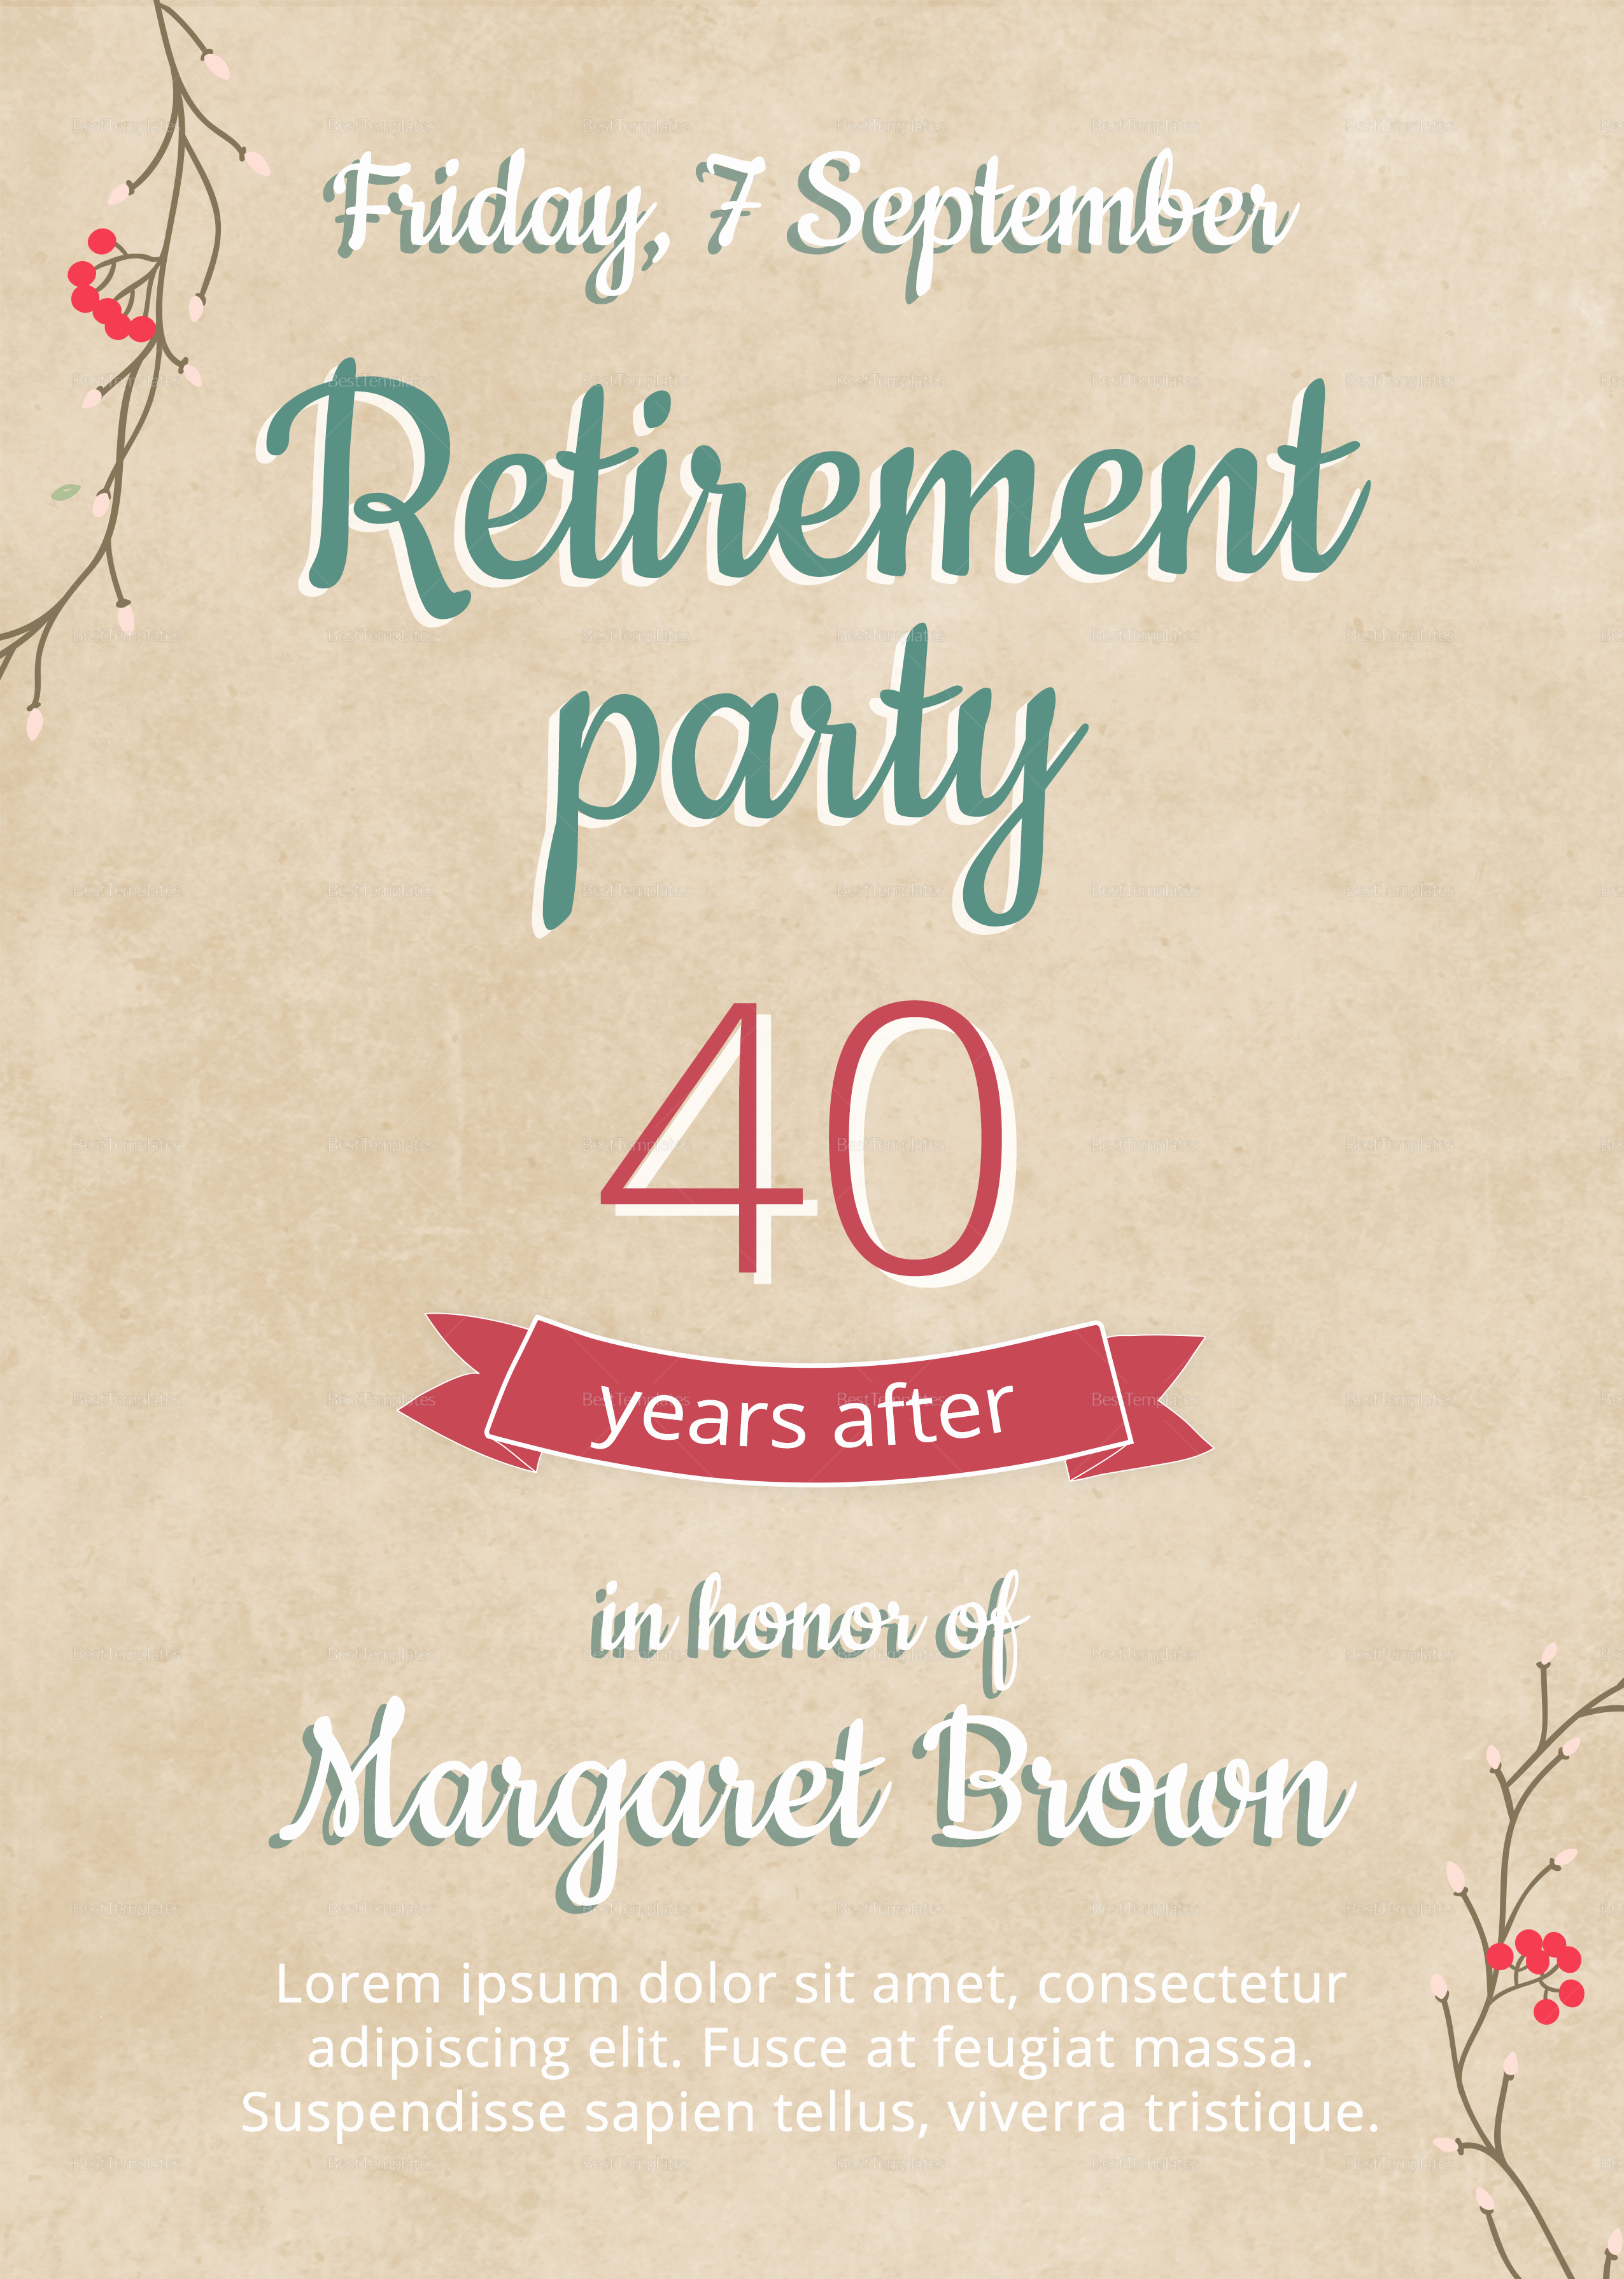 Retirement Party Flyer Template Inspirational Retirement Party Flyer Design Template In Psd Word